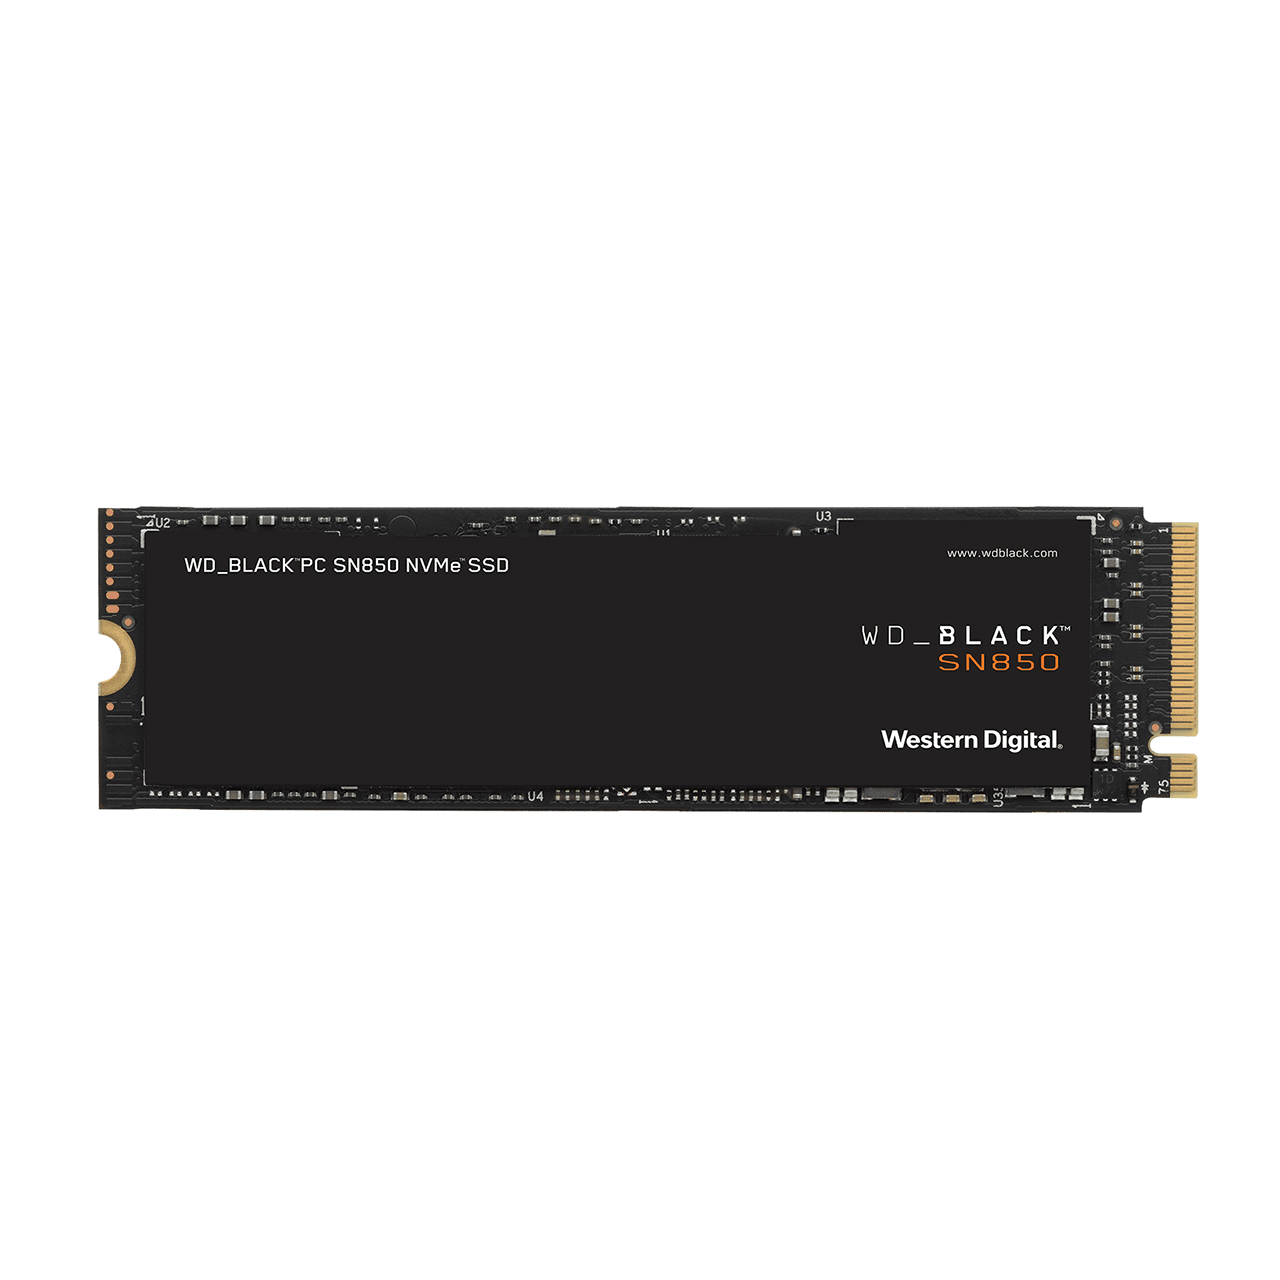 wd-black-sn850-nvme-ssd-front.png.thumb.1280.1280